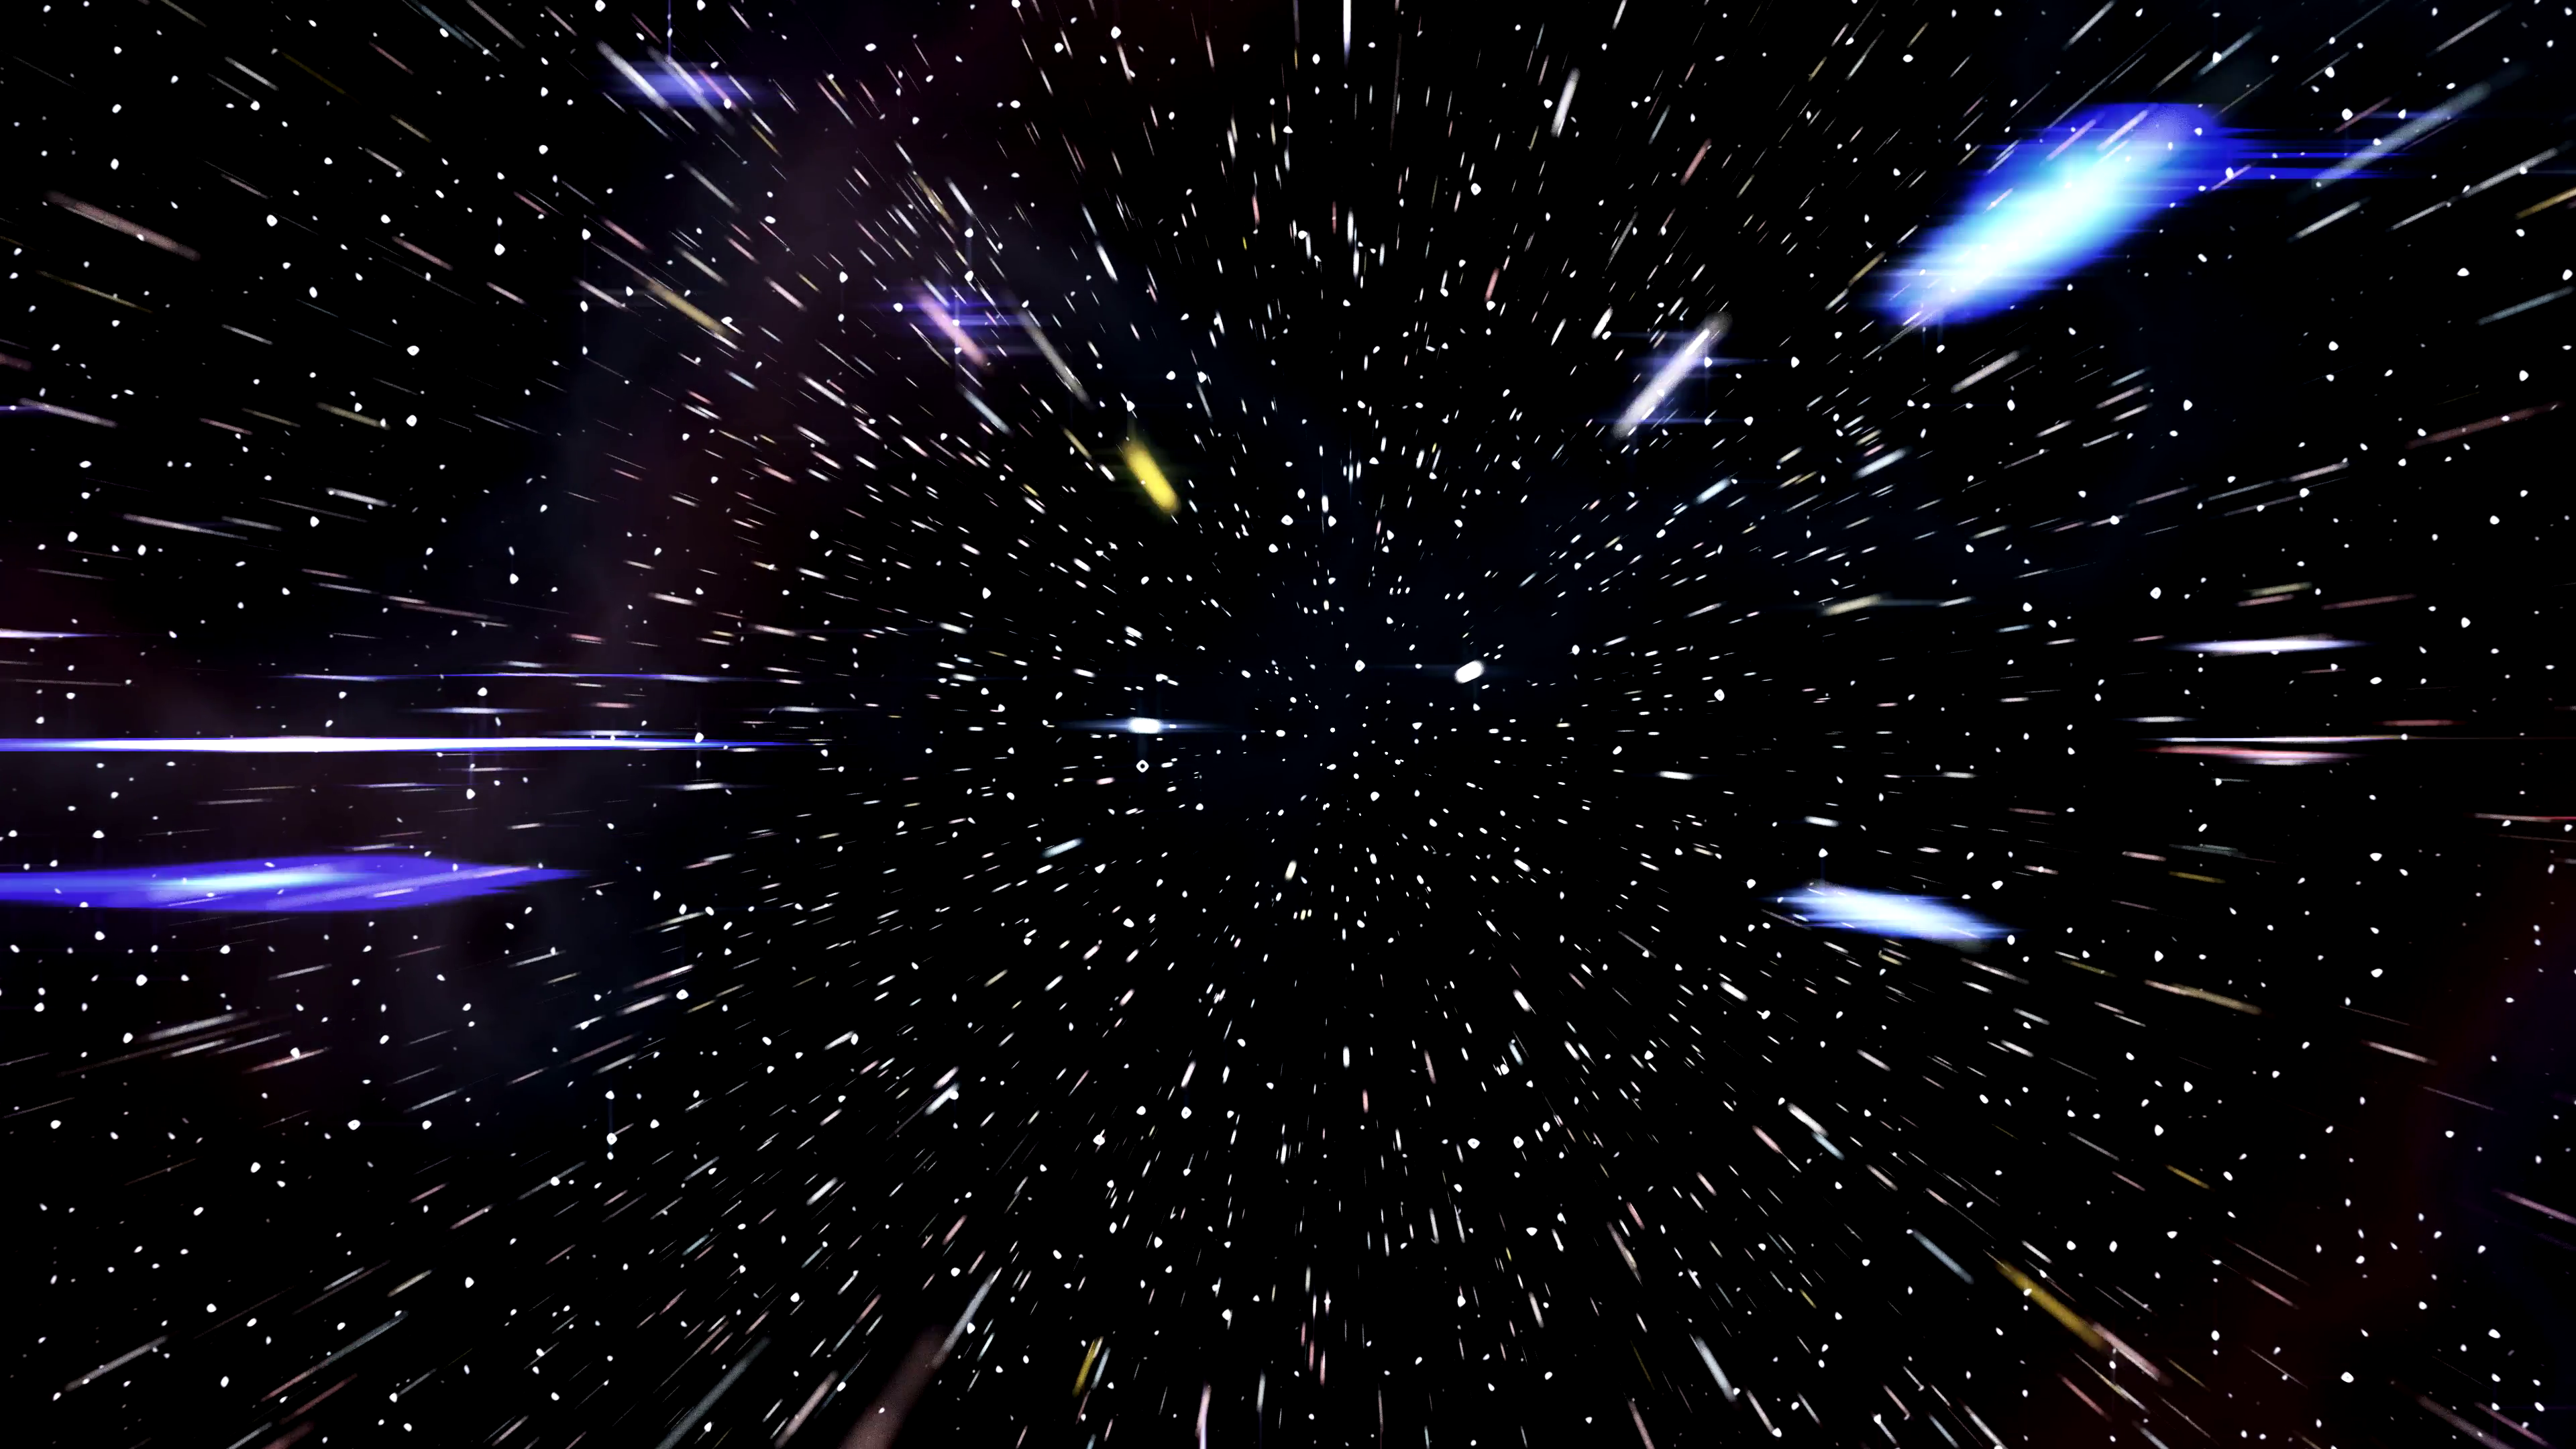 free for ios download Starfield